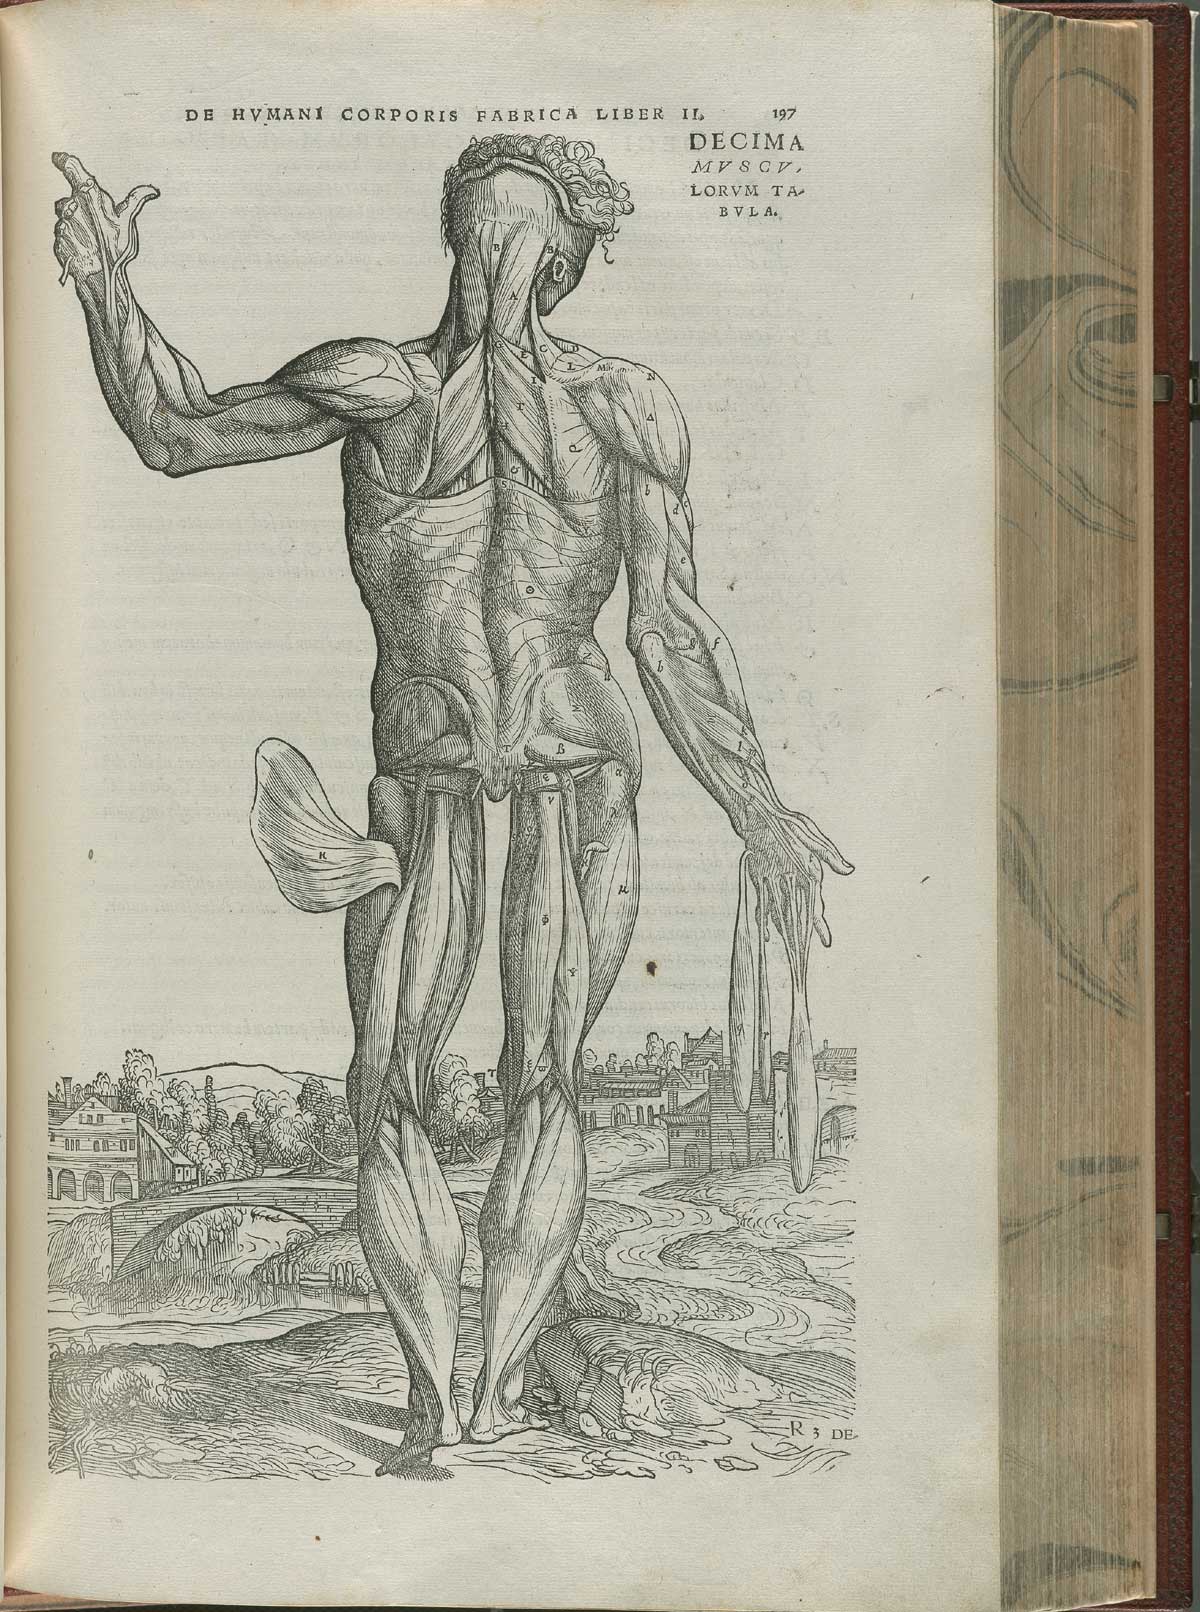 Page 197 of Andreas Vesalius' De corporis humani fabrica libri septem, featuring the illustrated woodcut of the tenth muscle plate, a full-length frontal view of a standing nude male in landscape. His skin is flayed with head head facing to the right, his left arm is raised and is displaying the muscles of the back of the body.